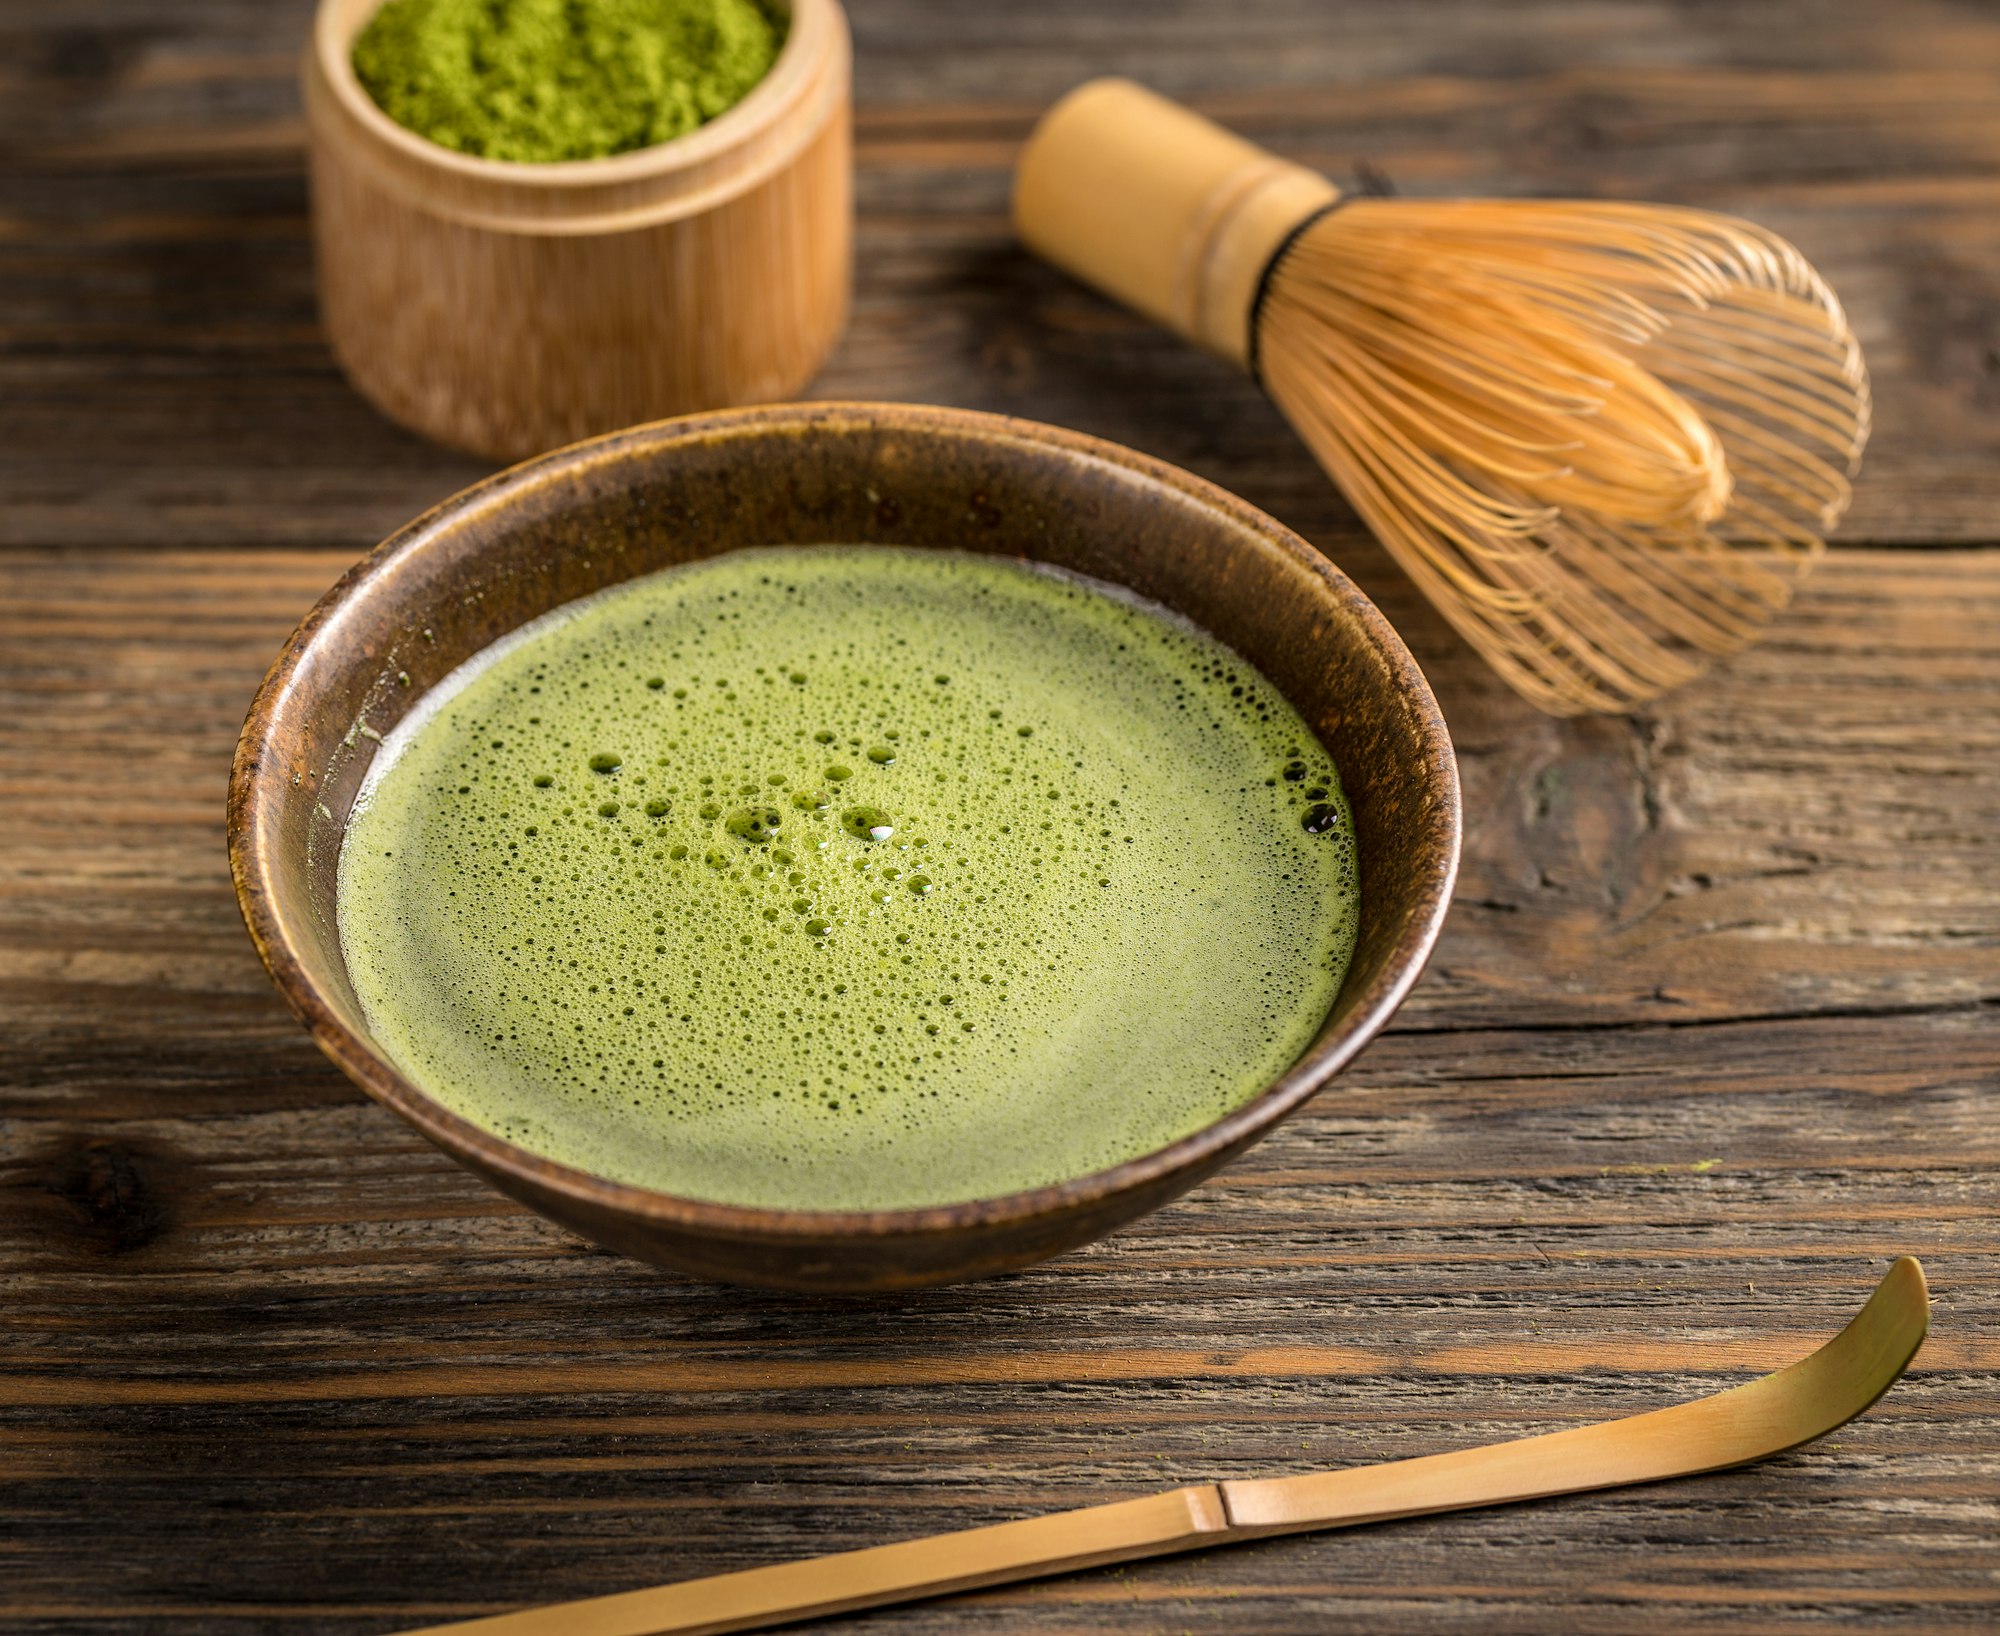 Can You Make Matcha The Night Before